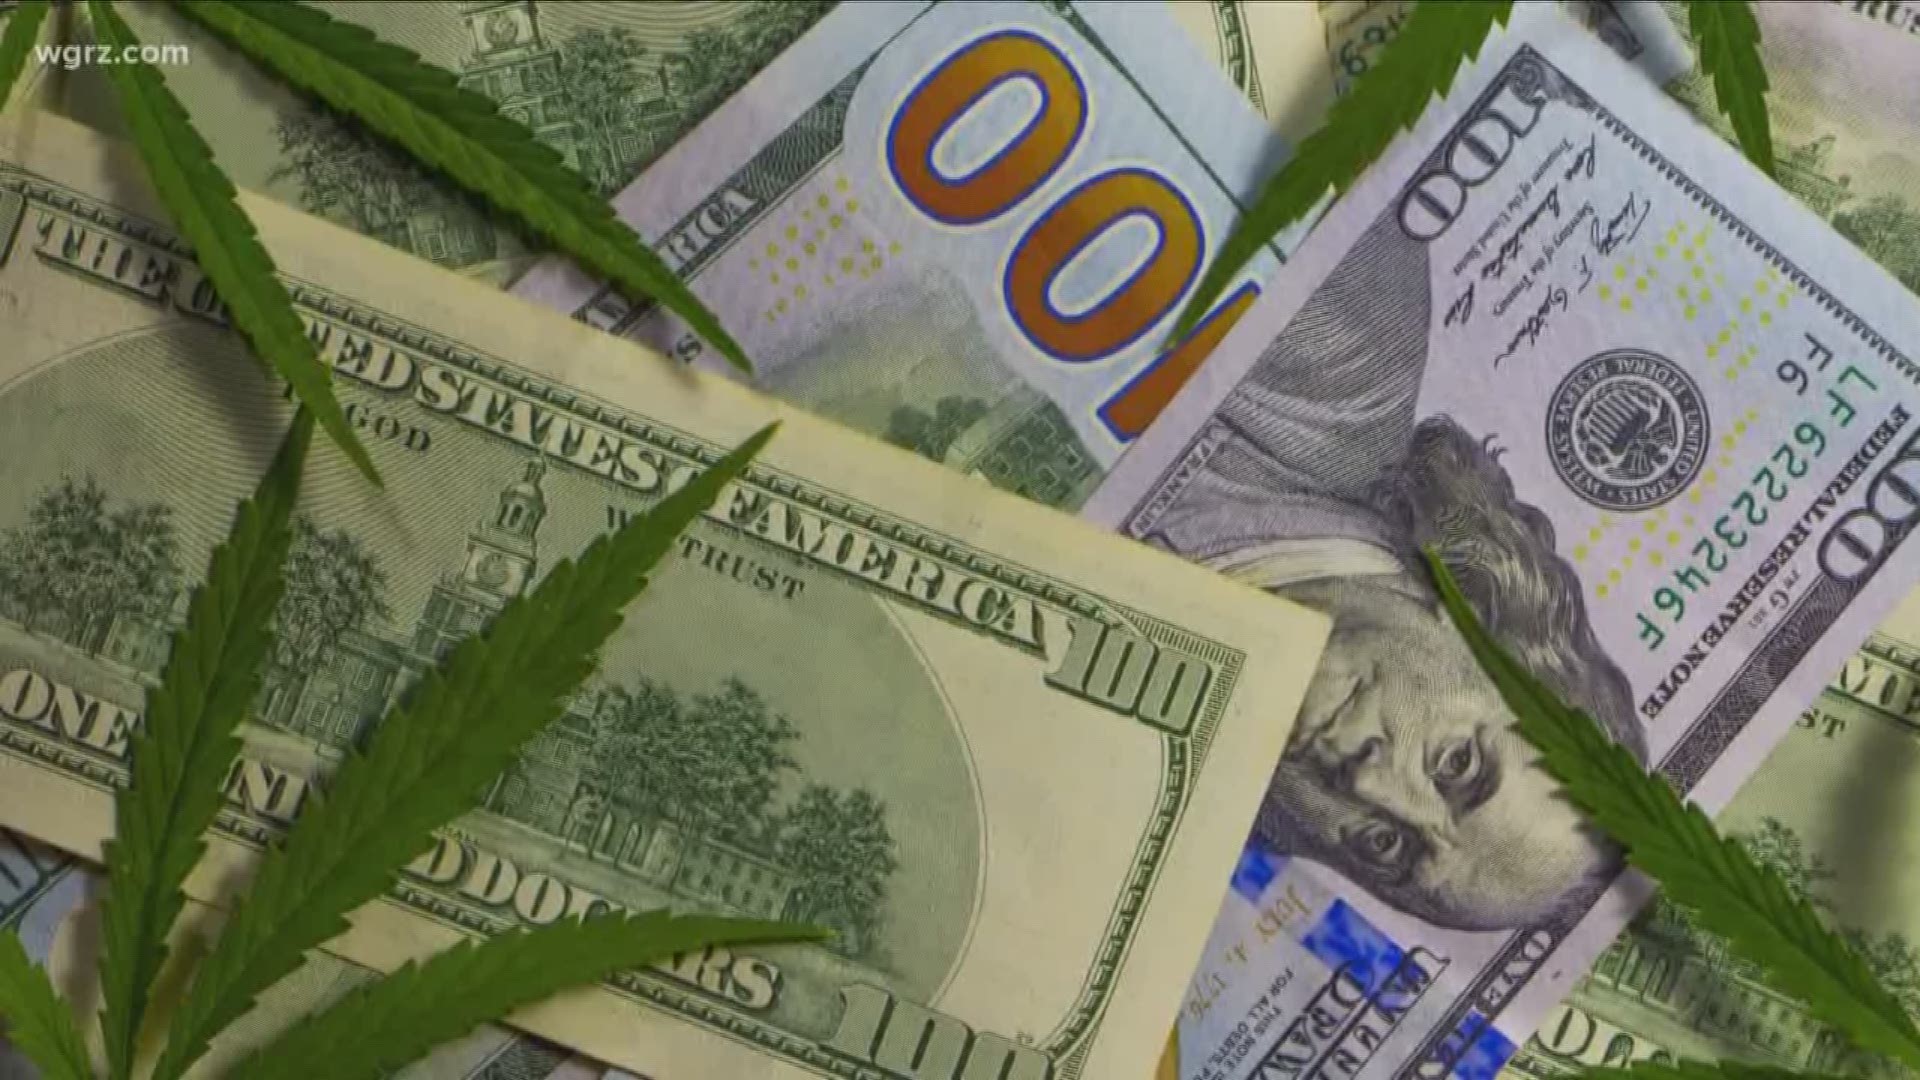 Will funds from cannabis sales fund the M-T-A